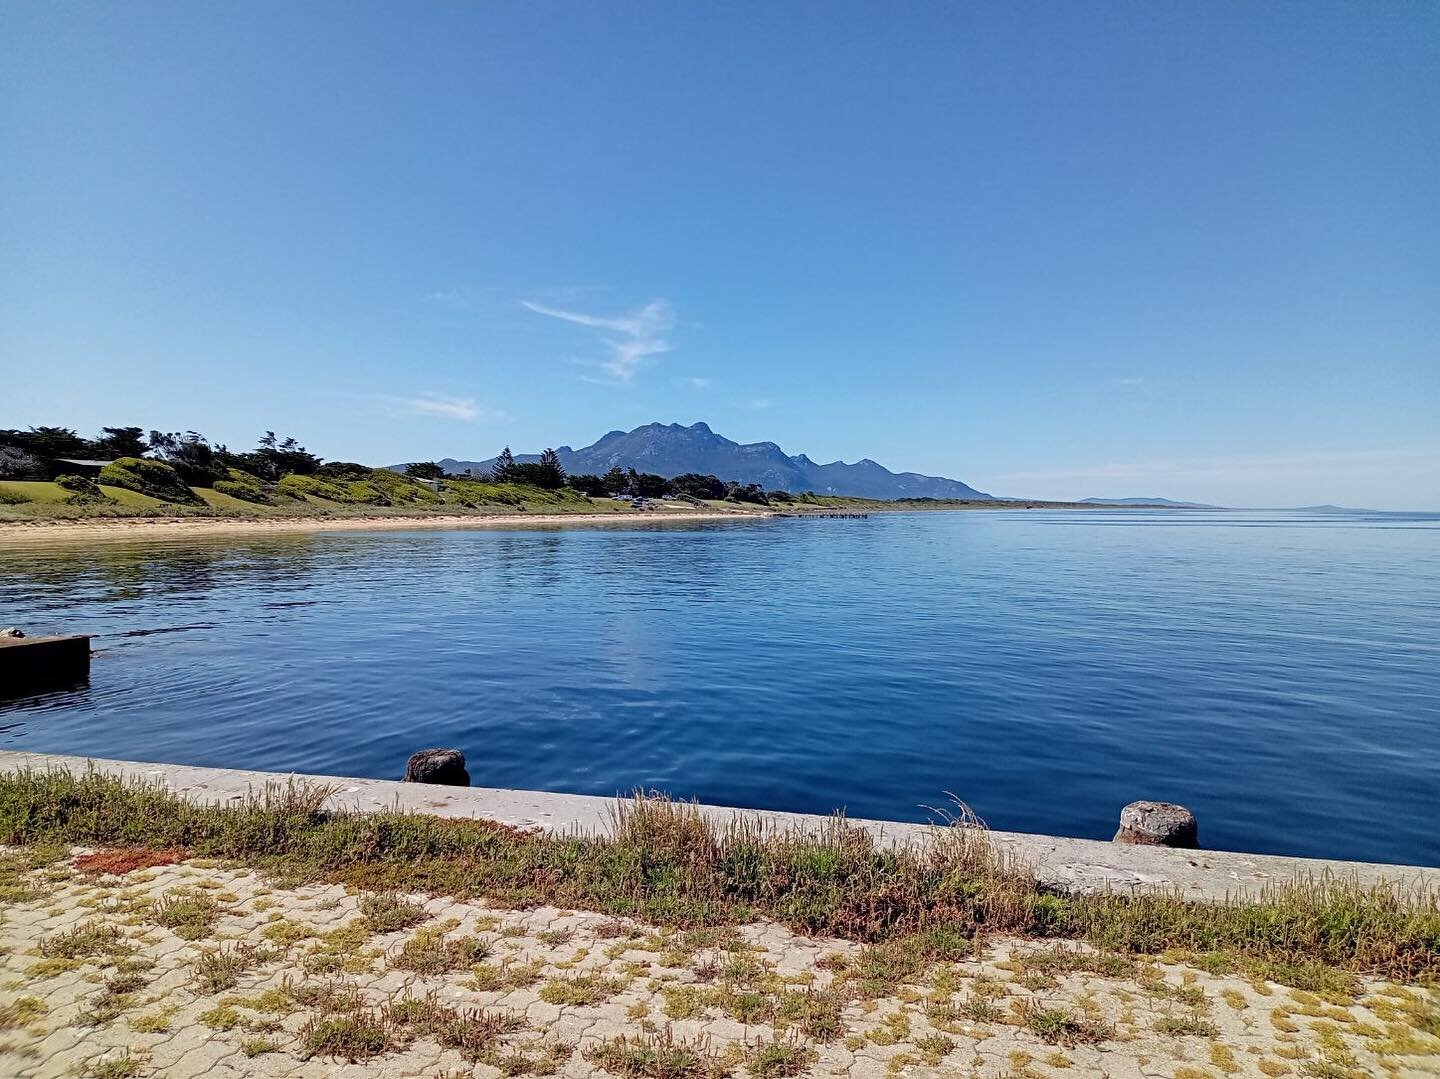 The view from the Flinders Island Wharf is spectacular. Another place that needs to be added to the list when visiting Flinders Island with us ☀️✈️🏝

#aviation #flying #flindersislandaviation #tasmania #tas #discovertasmania #flyingintasmania #north